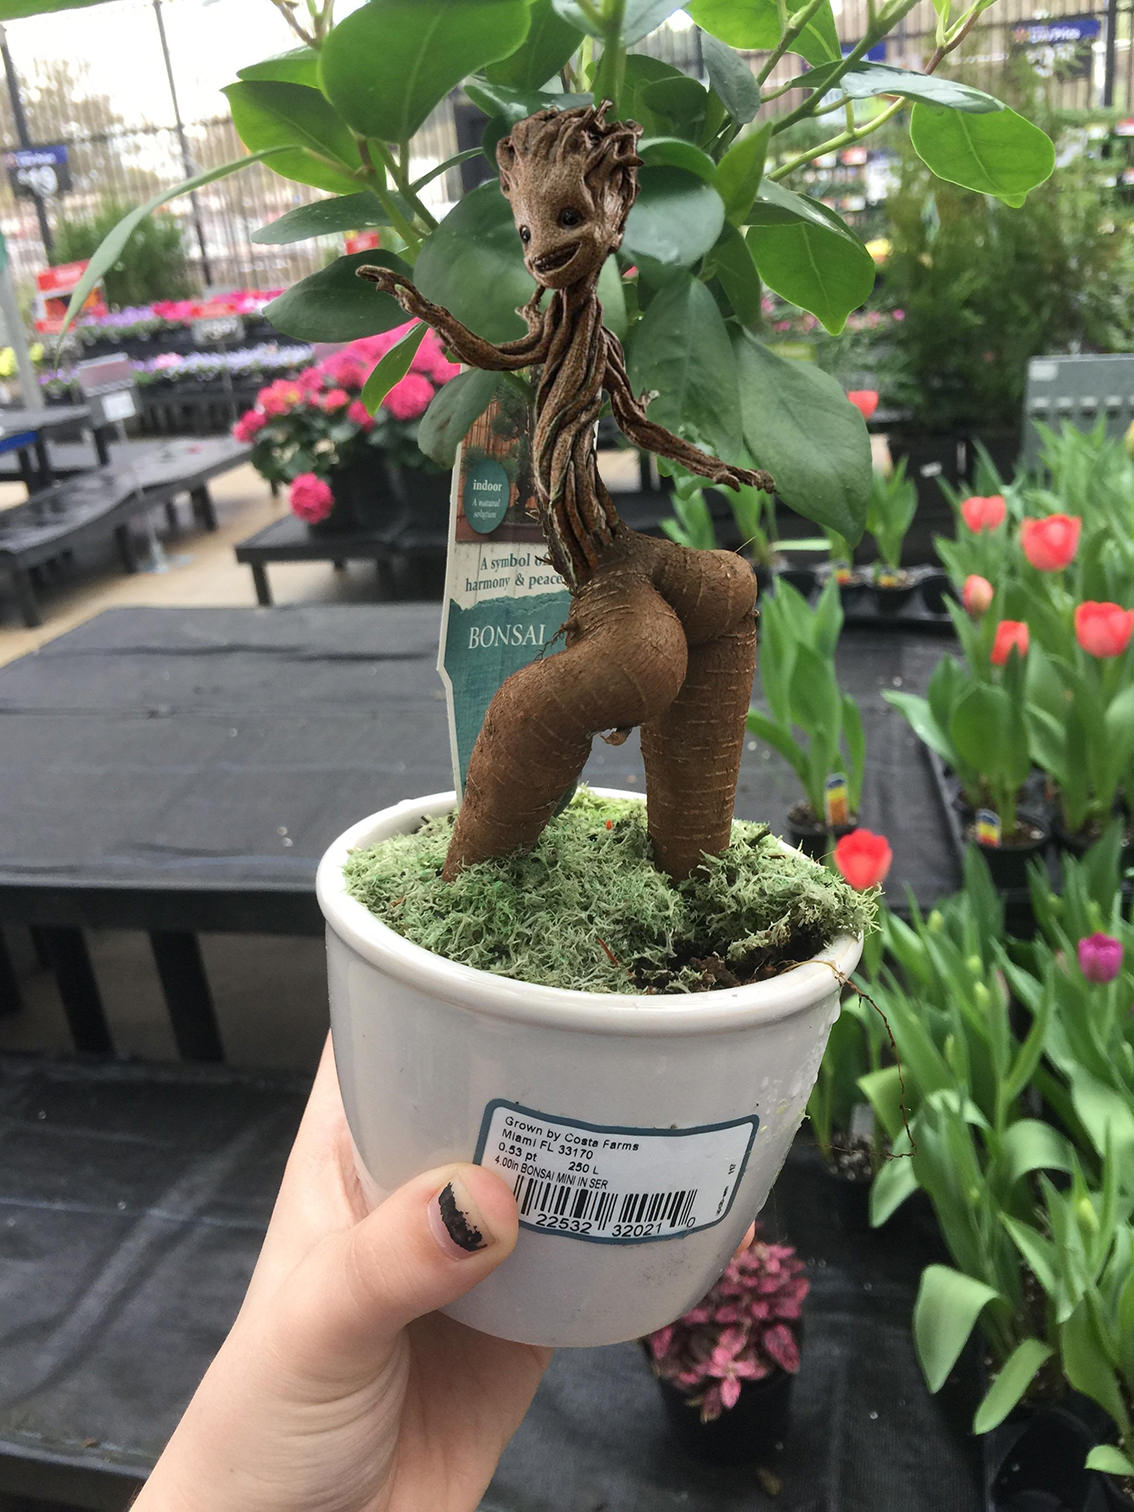 reddit memes - things that look like butts - indoor A symbol harmony & peace Bonsai Grown by Costa Farms Miami Fl 33170 0.53 pt 4.00in Bonsai Mini In Ser 250 L 22532 | 32021